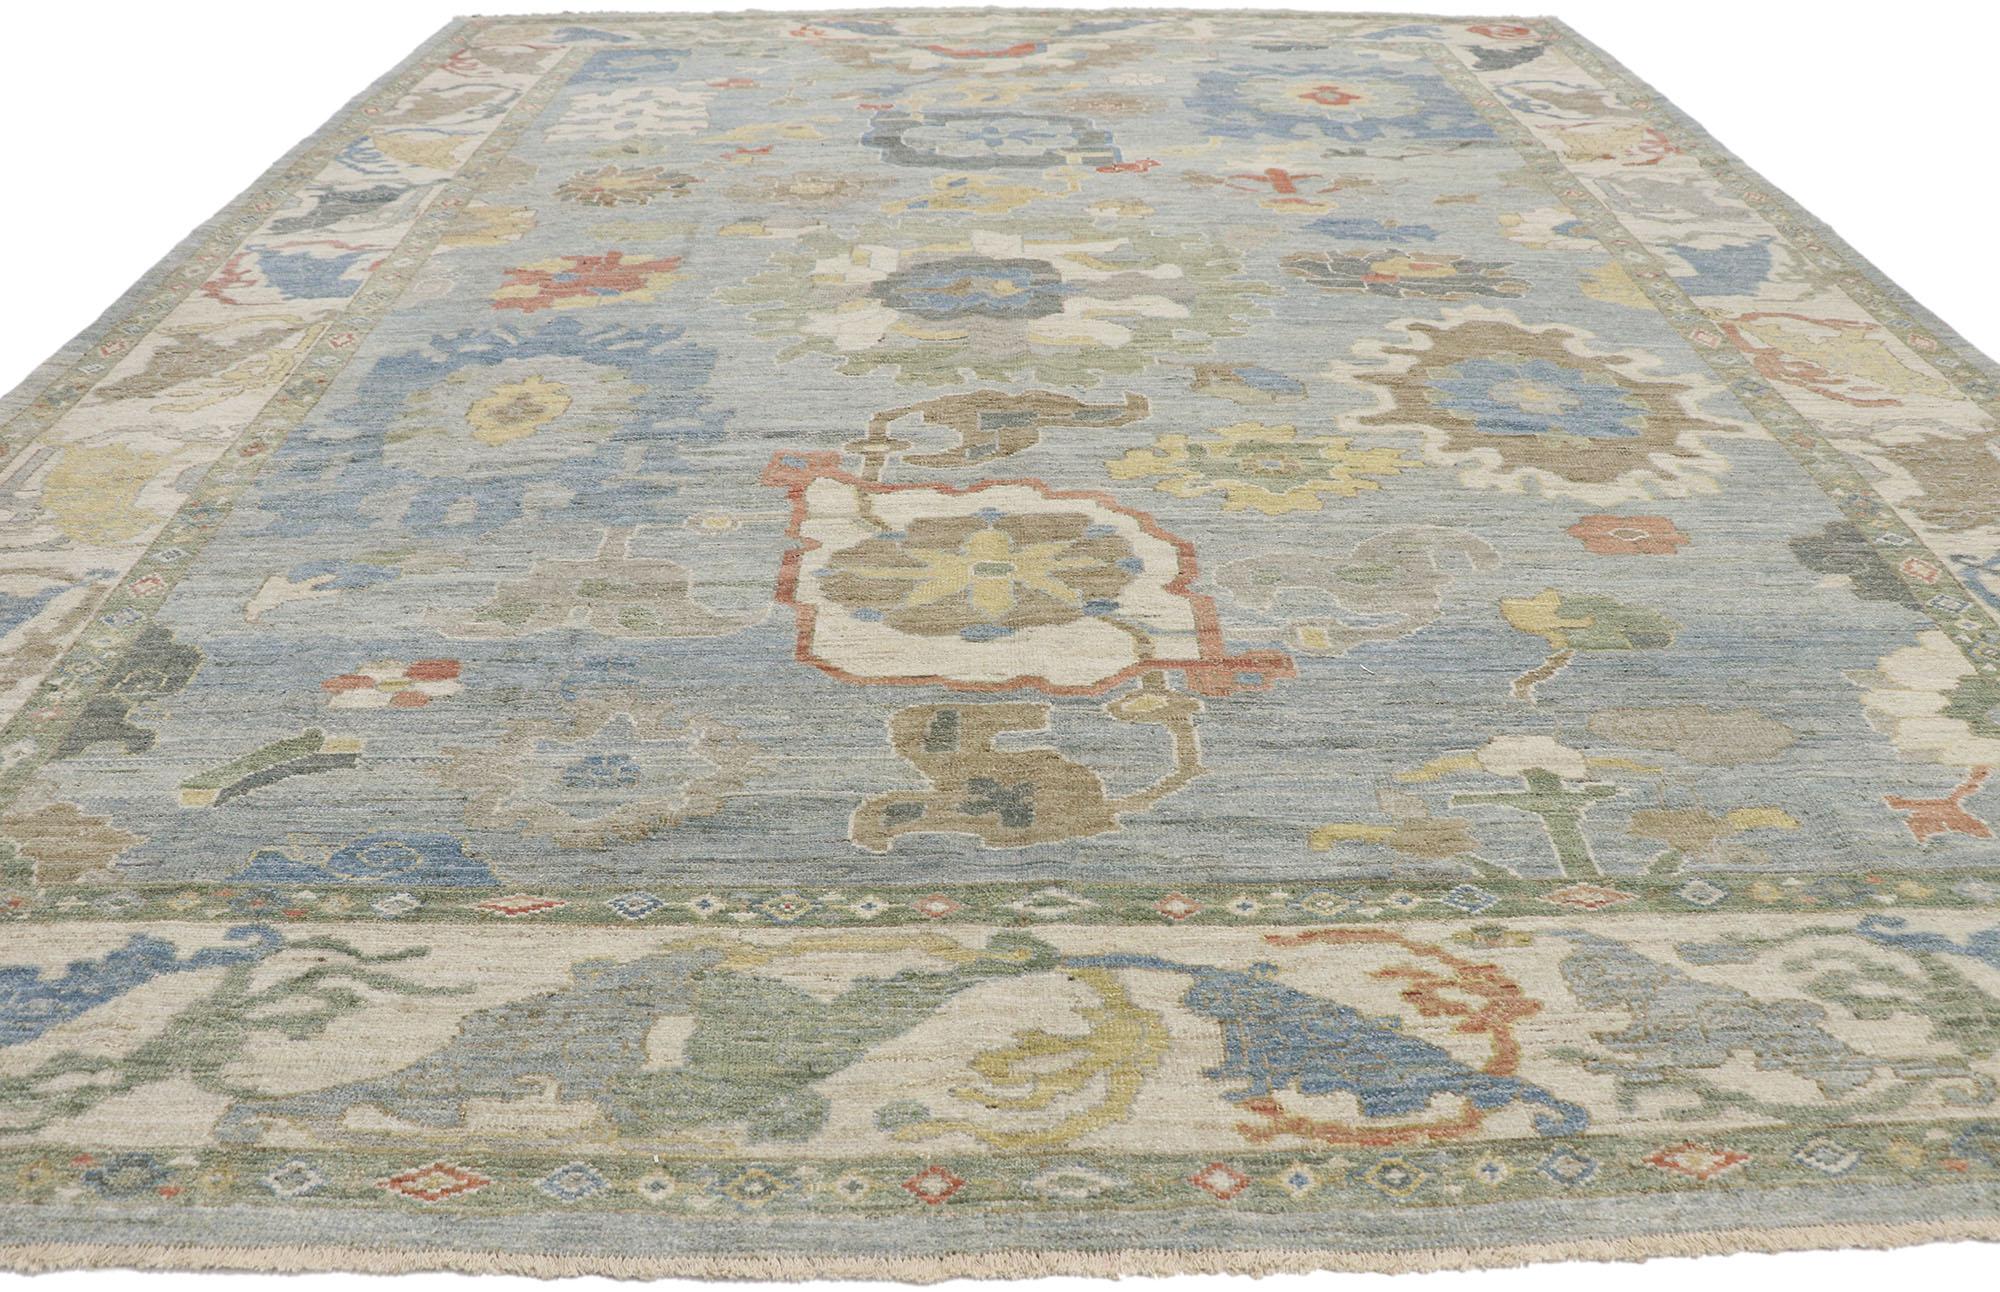 Turkish New Contemporary Persian Sultanabad Rug with Modern Coastal Style